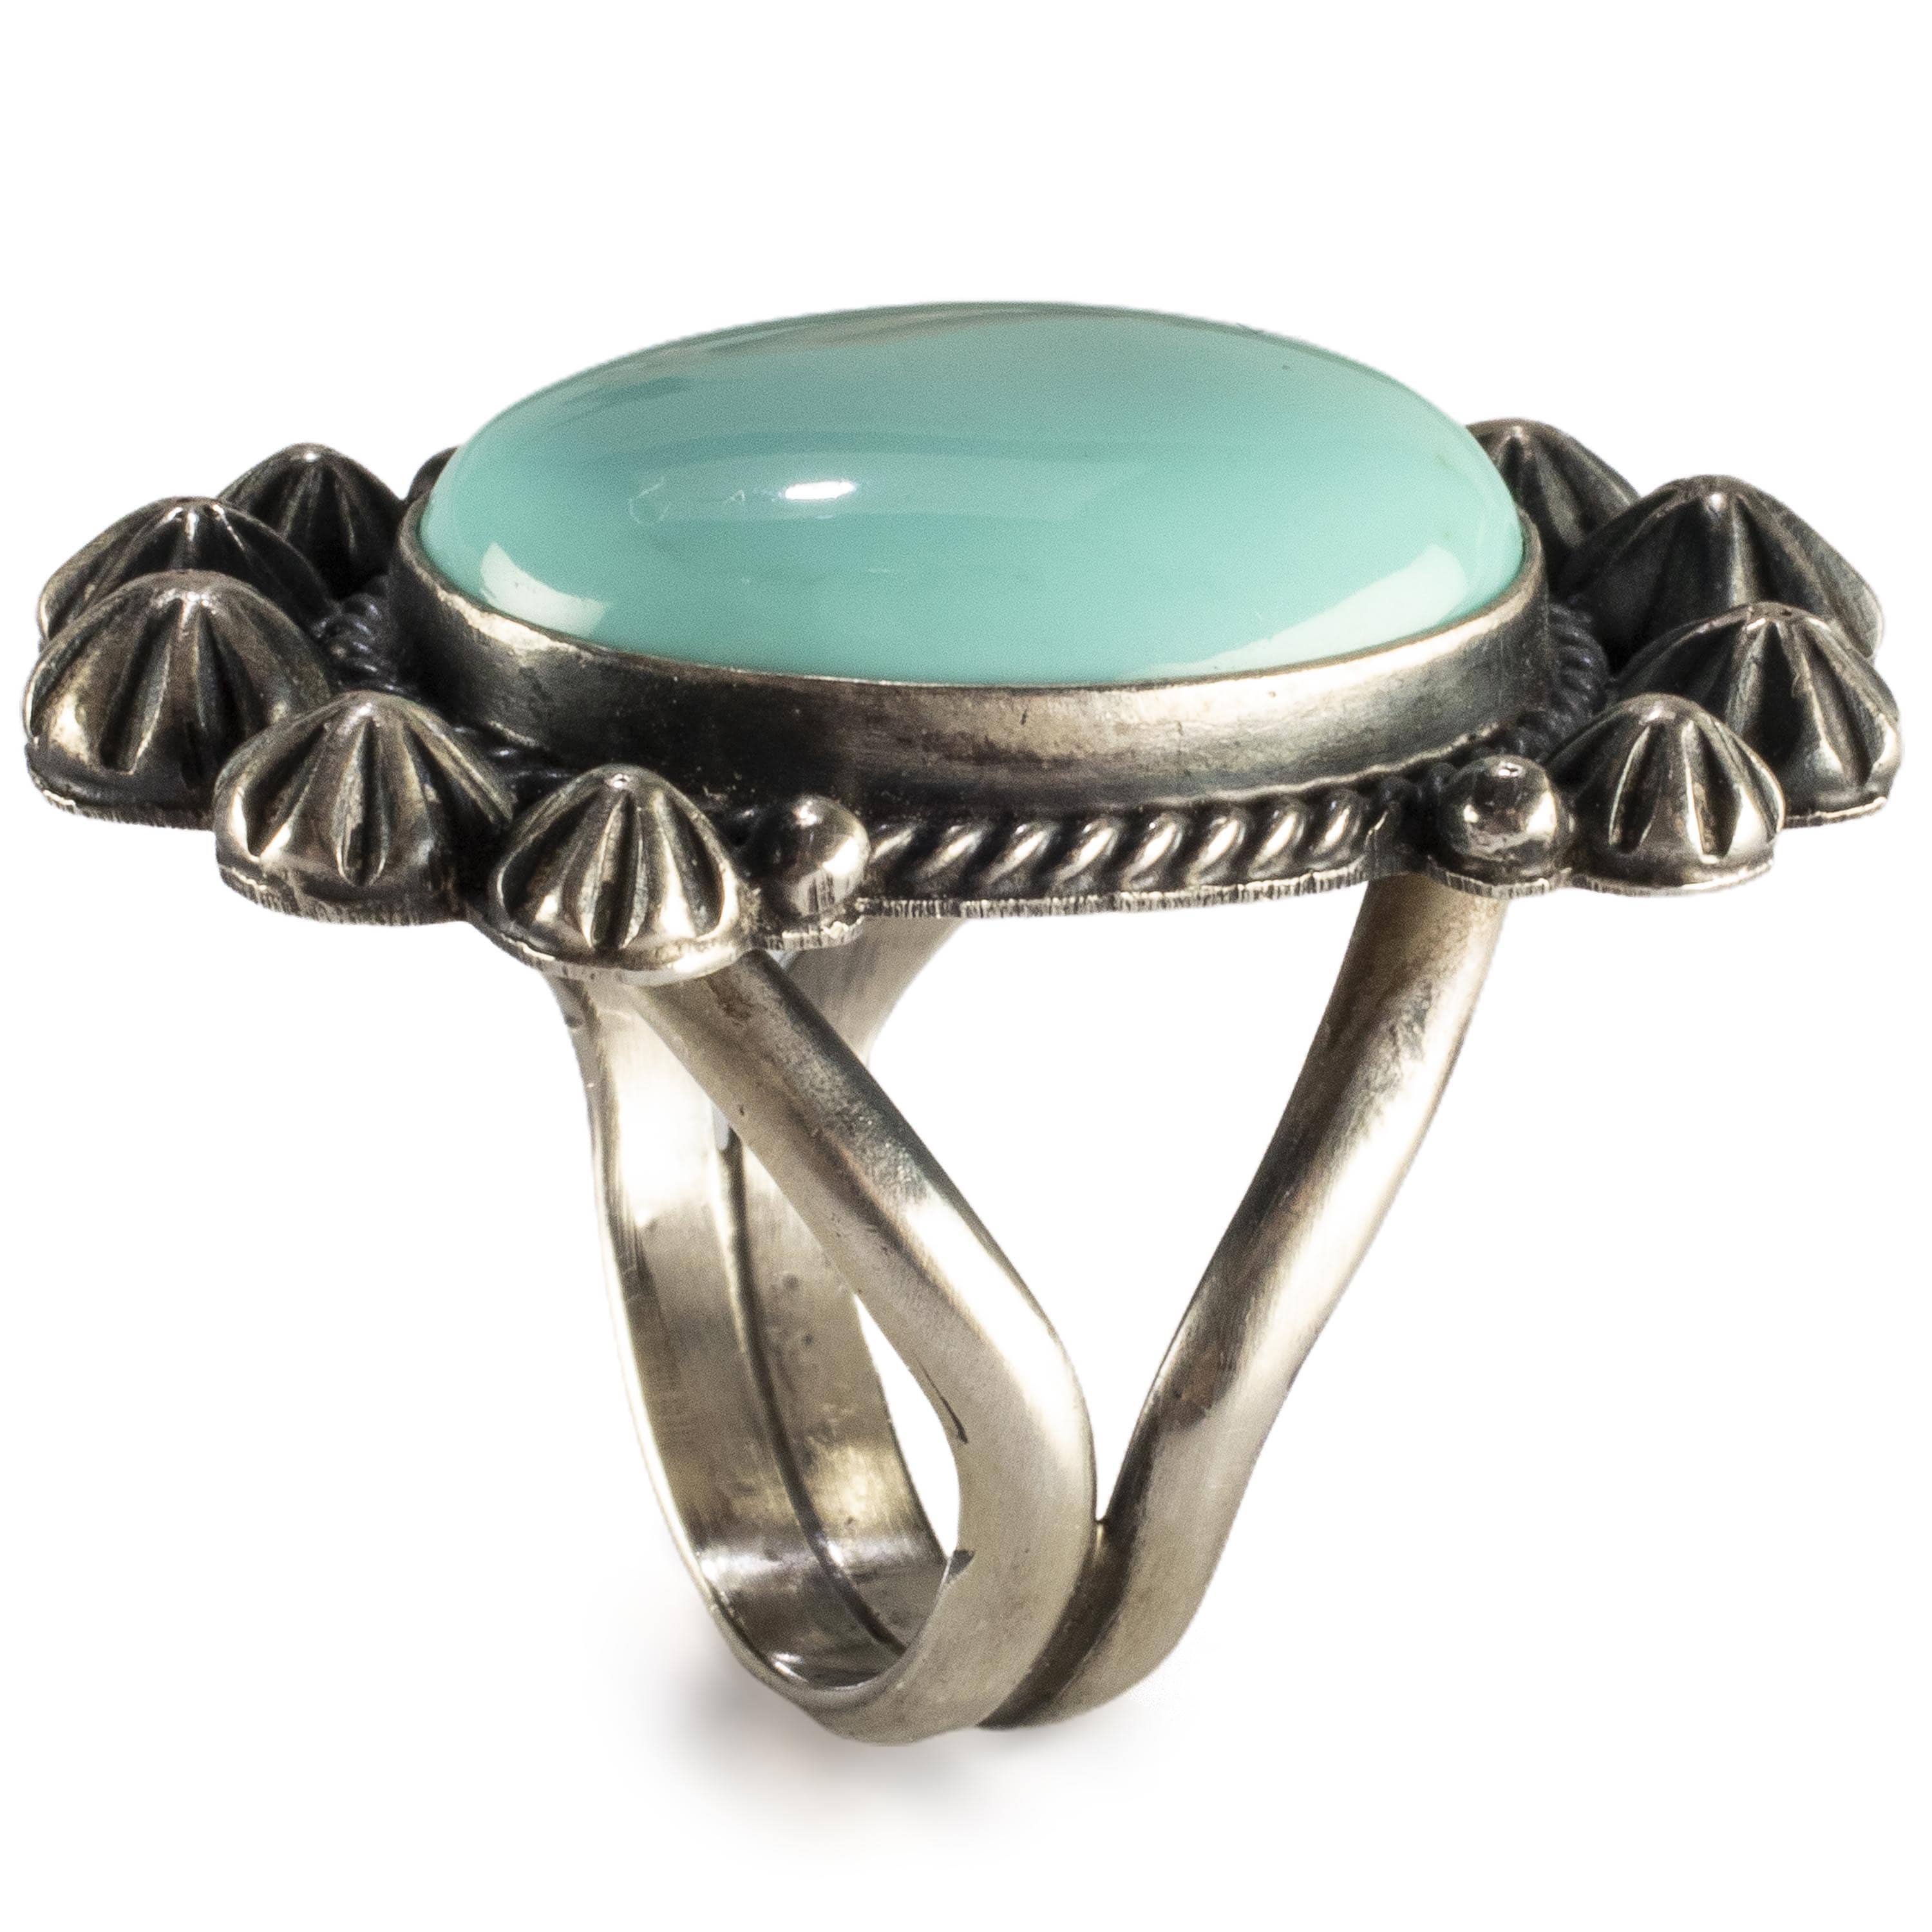 Kalifano Native American Jewelry 6 Michael & Rose Calladitto Navajo Campitos Turquoise USA Native American Made 925 Sterling Silver Ring NAR500.070.6